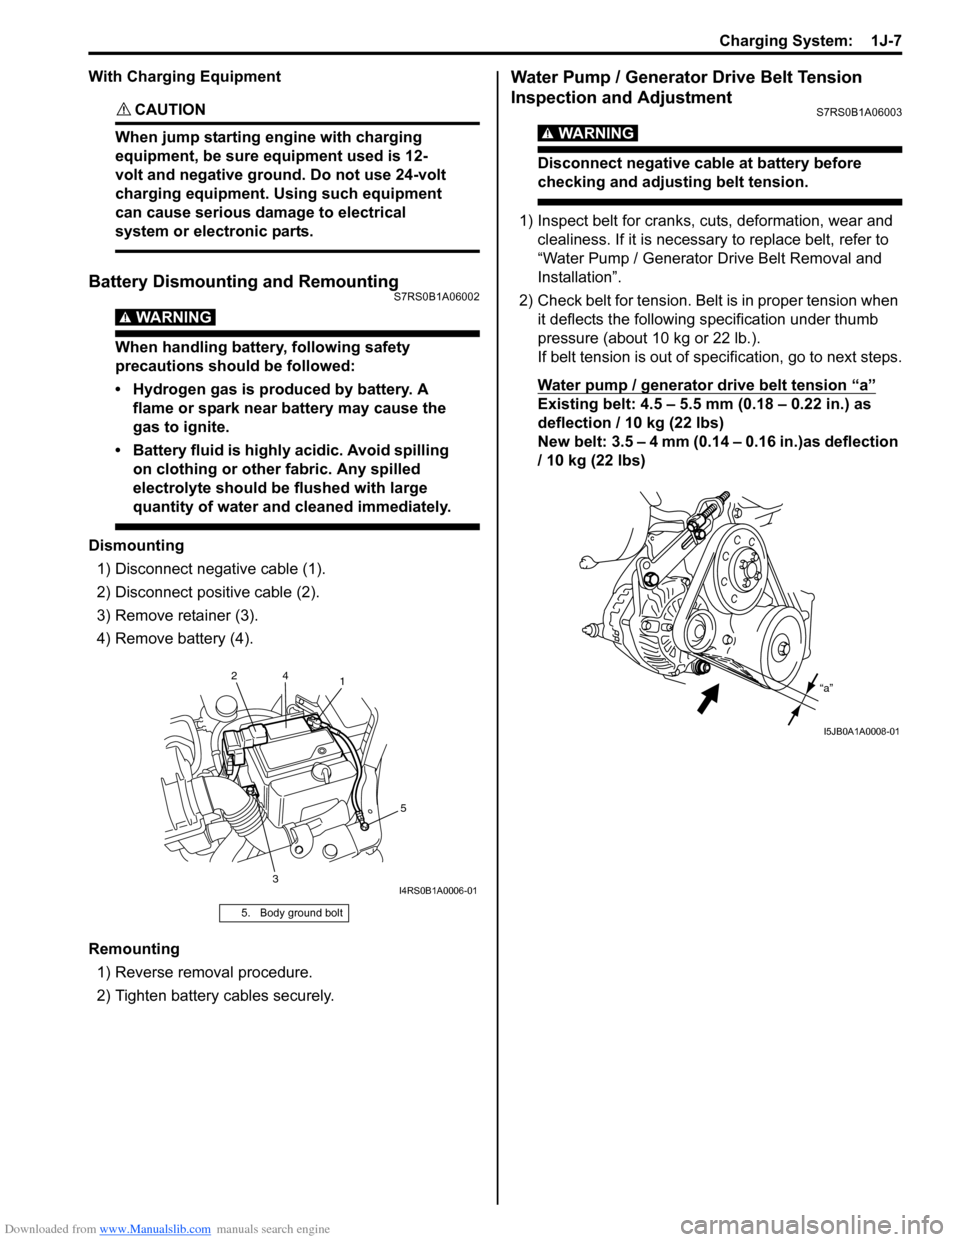 SUZUKI SWIFT 2005 2.G Service Workshop Manual Downloaded from www.Manualslib.com manuals search engine Charging System:  1J-7
With Charging Equipment
CAUTION! 
When jump starting engine with charging 
equipment, be sure equipment used is 12-
volt